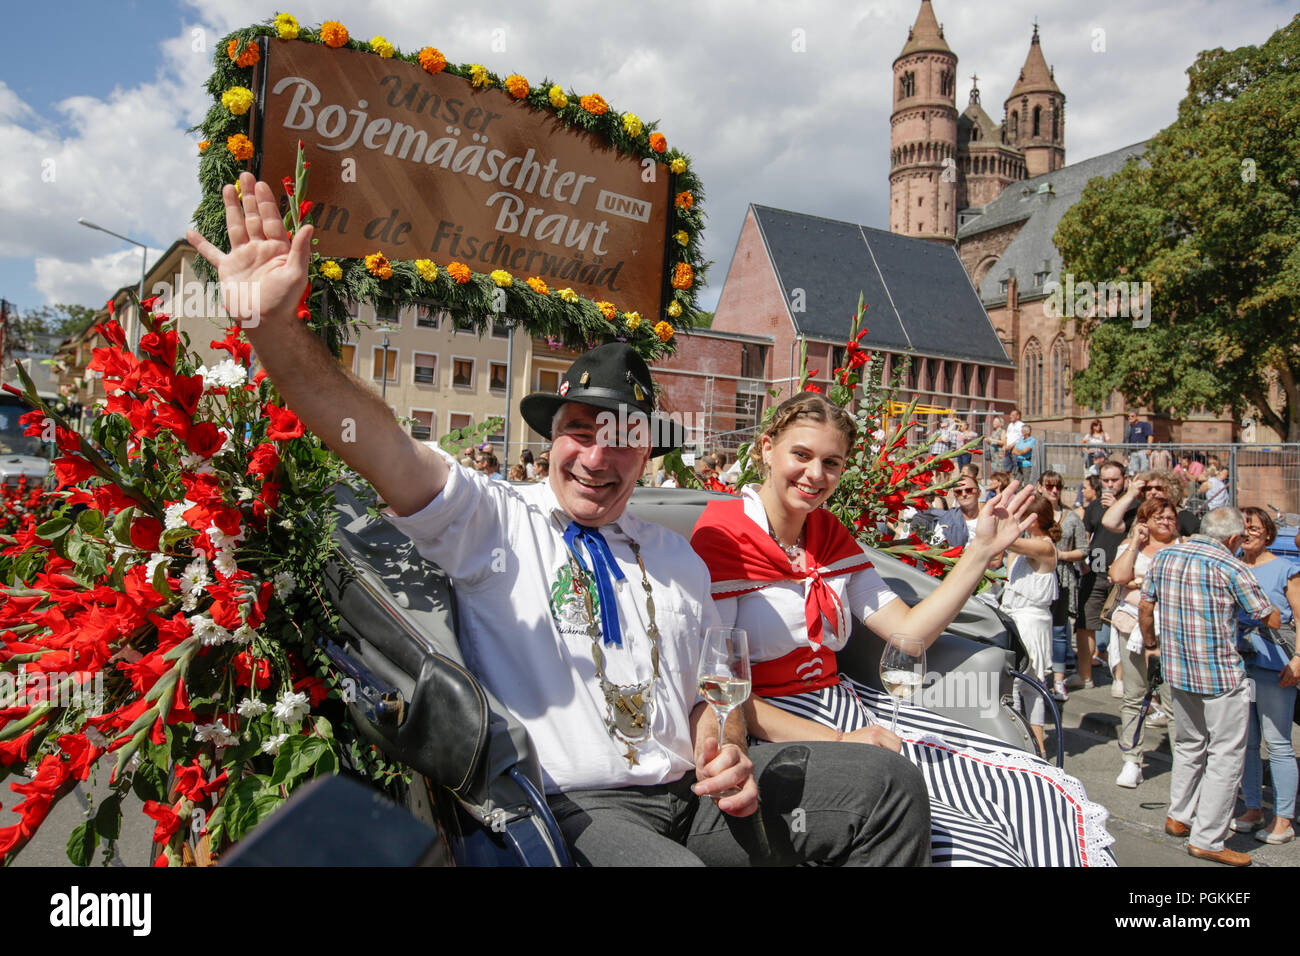 Worms, Germany. 26th Aug, 2018. The Bojemaaschter vun de Fischerwaad (mayor of the fishermen's lea), Markus Trapp, and his bride Beatrice Duda ride in an open horse-drawn carriage in the parade, waving to the crowd. The first highlight of the 2018 Backfischfest was the big parade through the city of Worms with over 70 groups and floats. Community groups, music groups and businesses from Worms and further afield took part. Credit: Michael Debets/Pacific Press/Alamy Live News Stock Photo